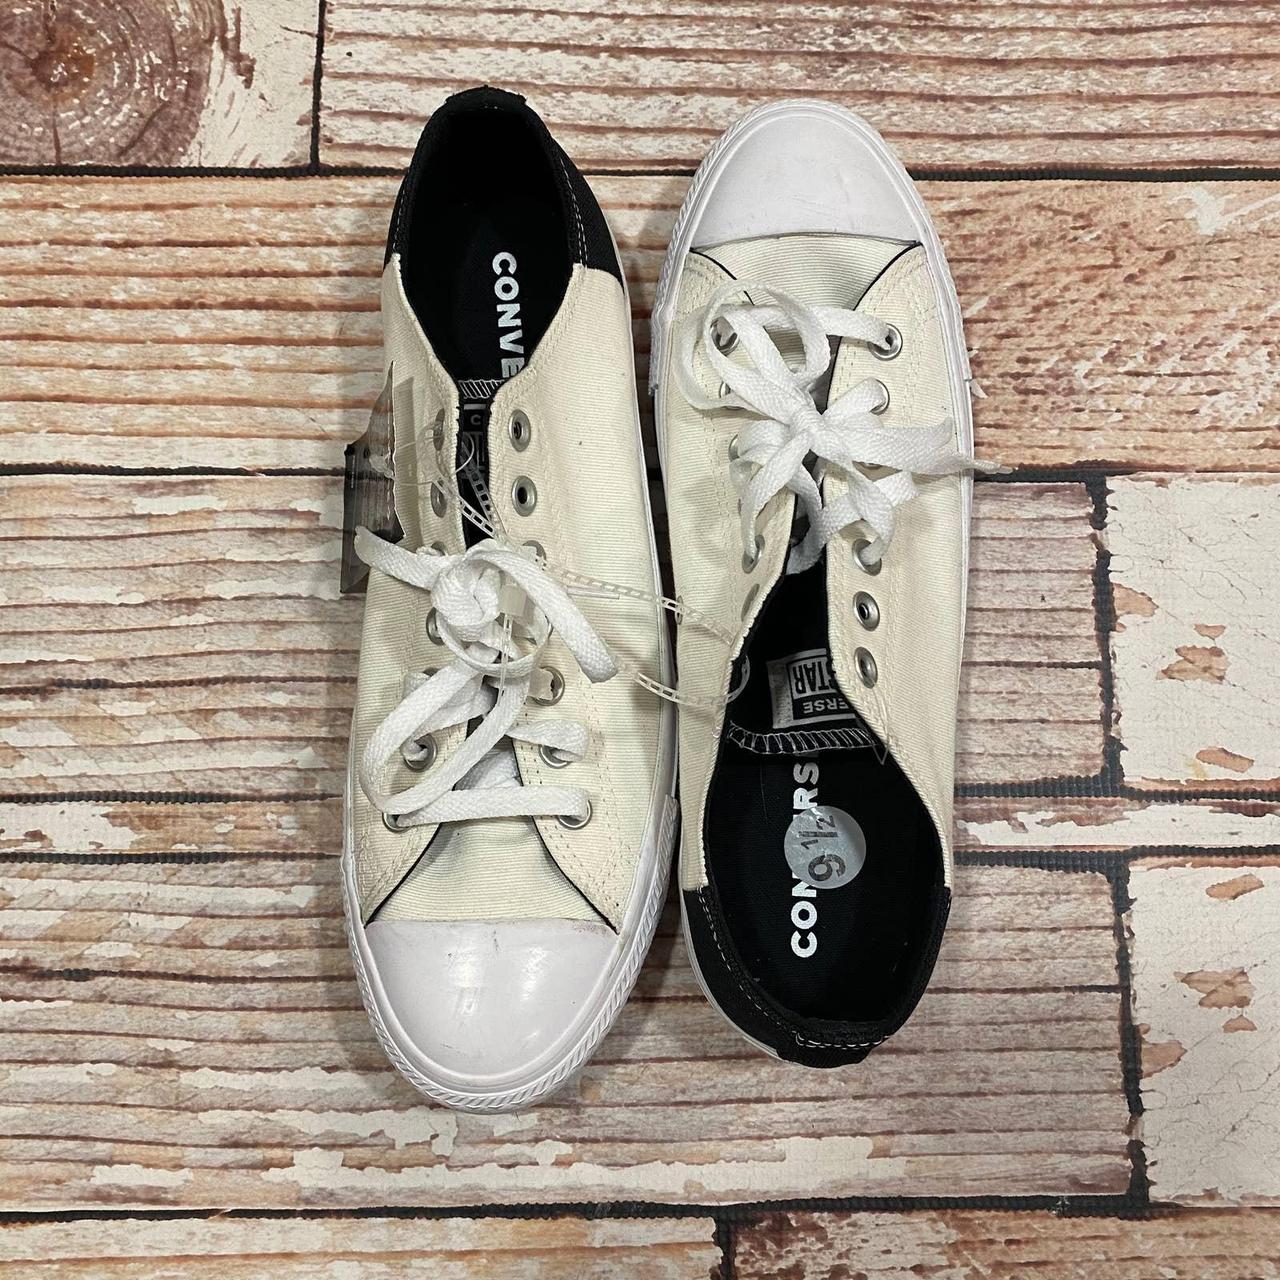 Converse Men's White and Cream Boat-shoes | Depop